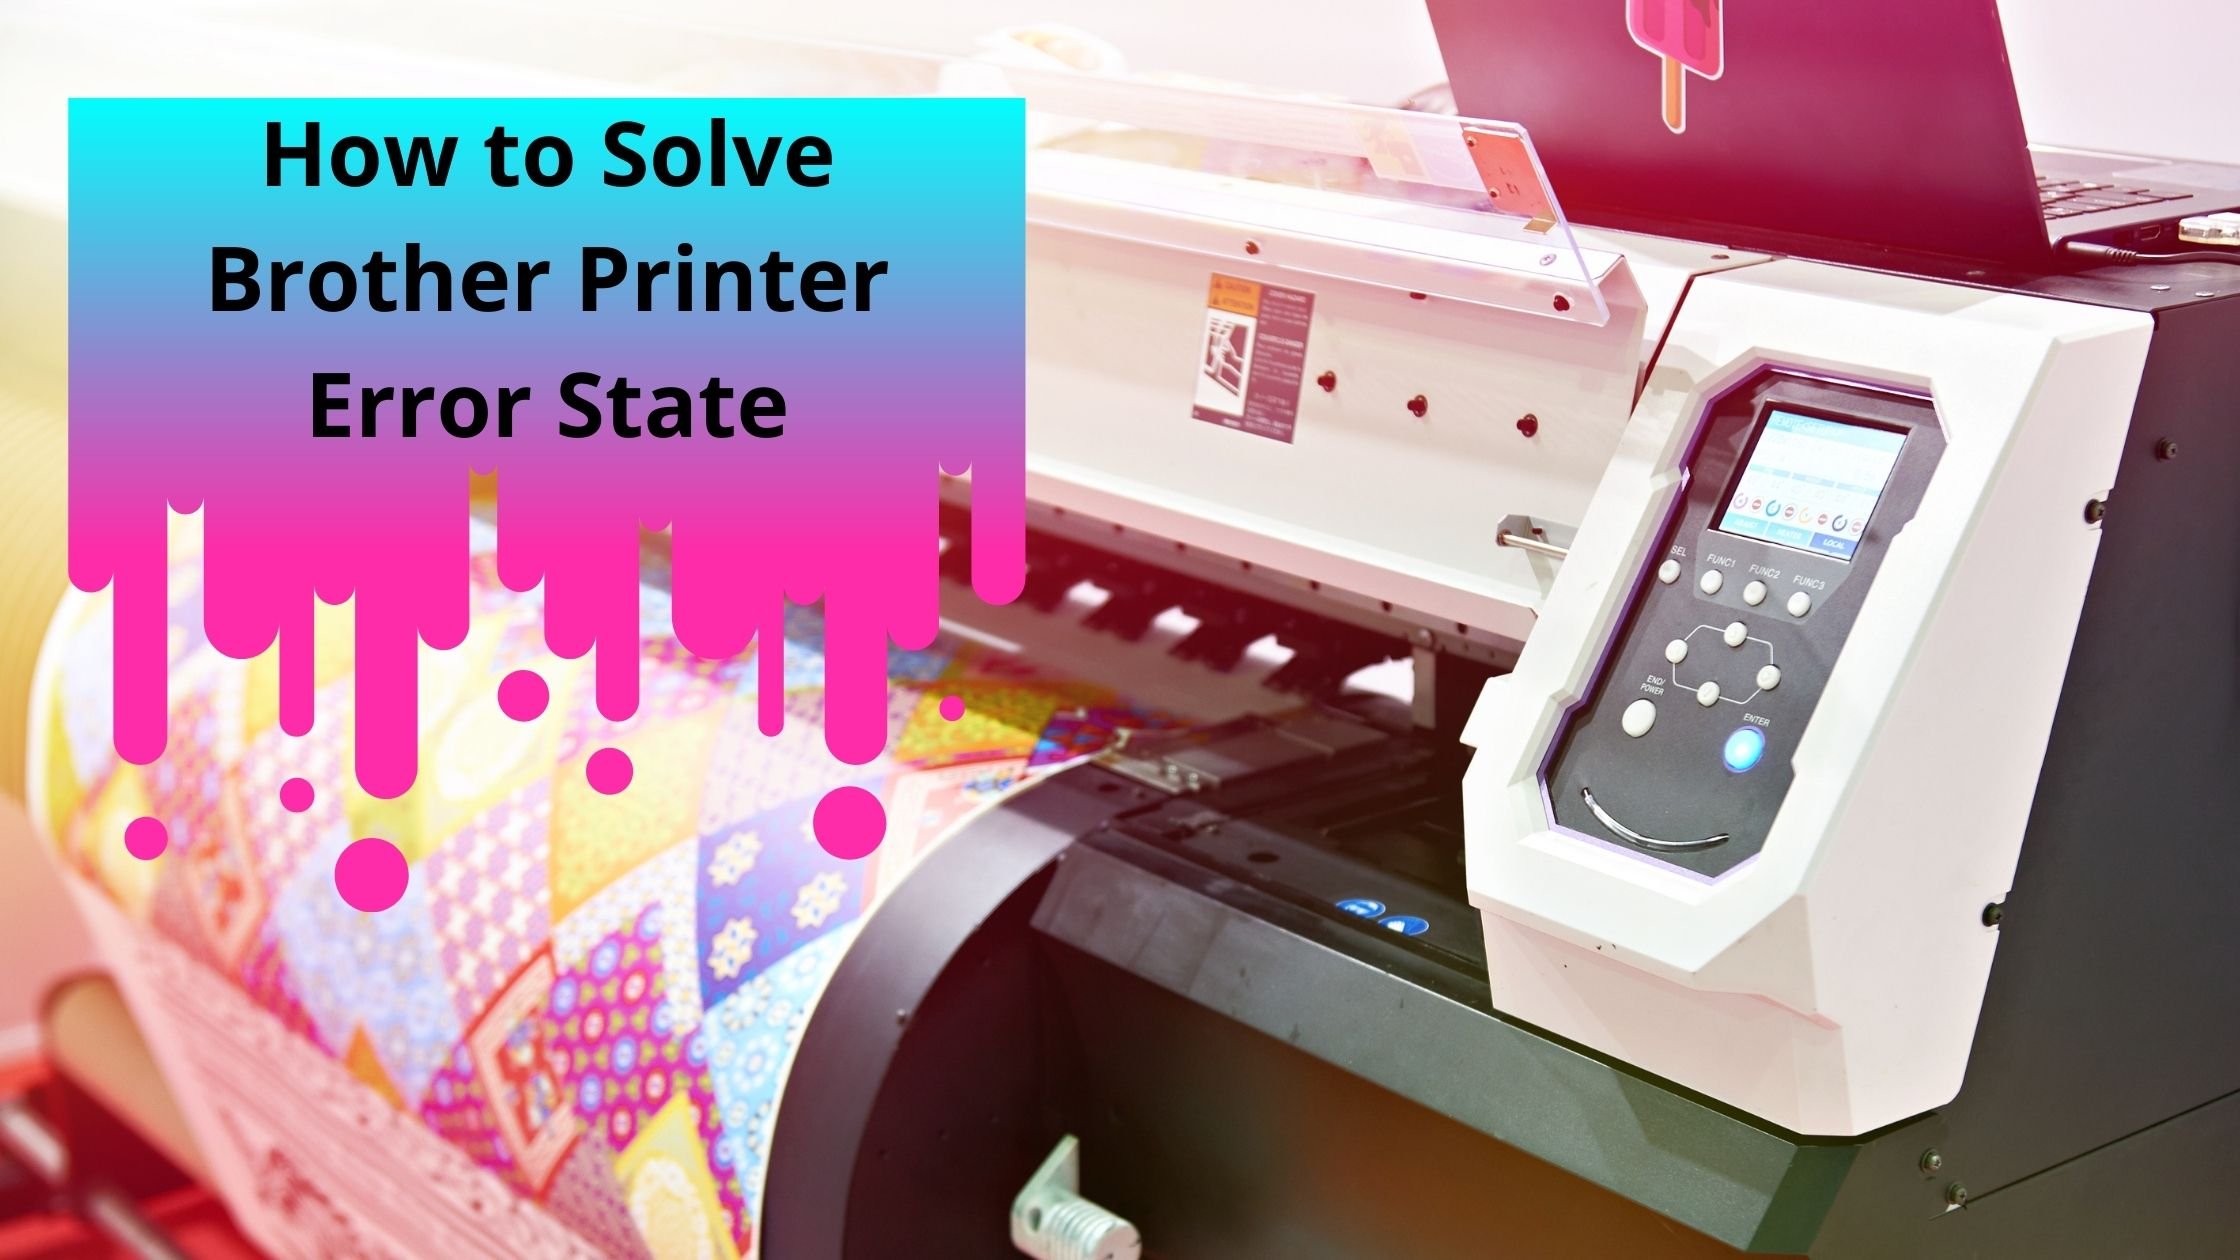 How to Solve Brother Printer Error State